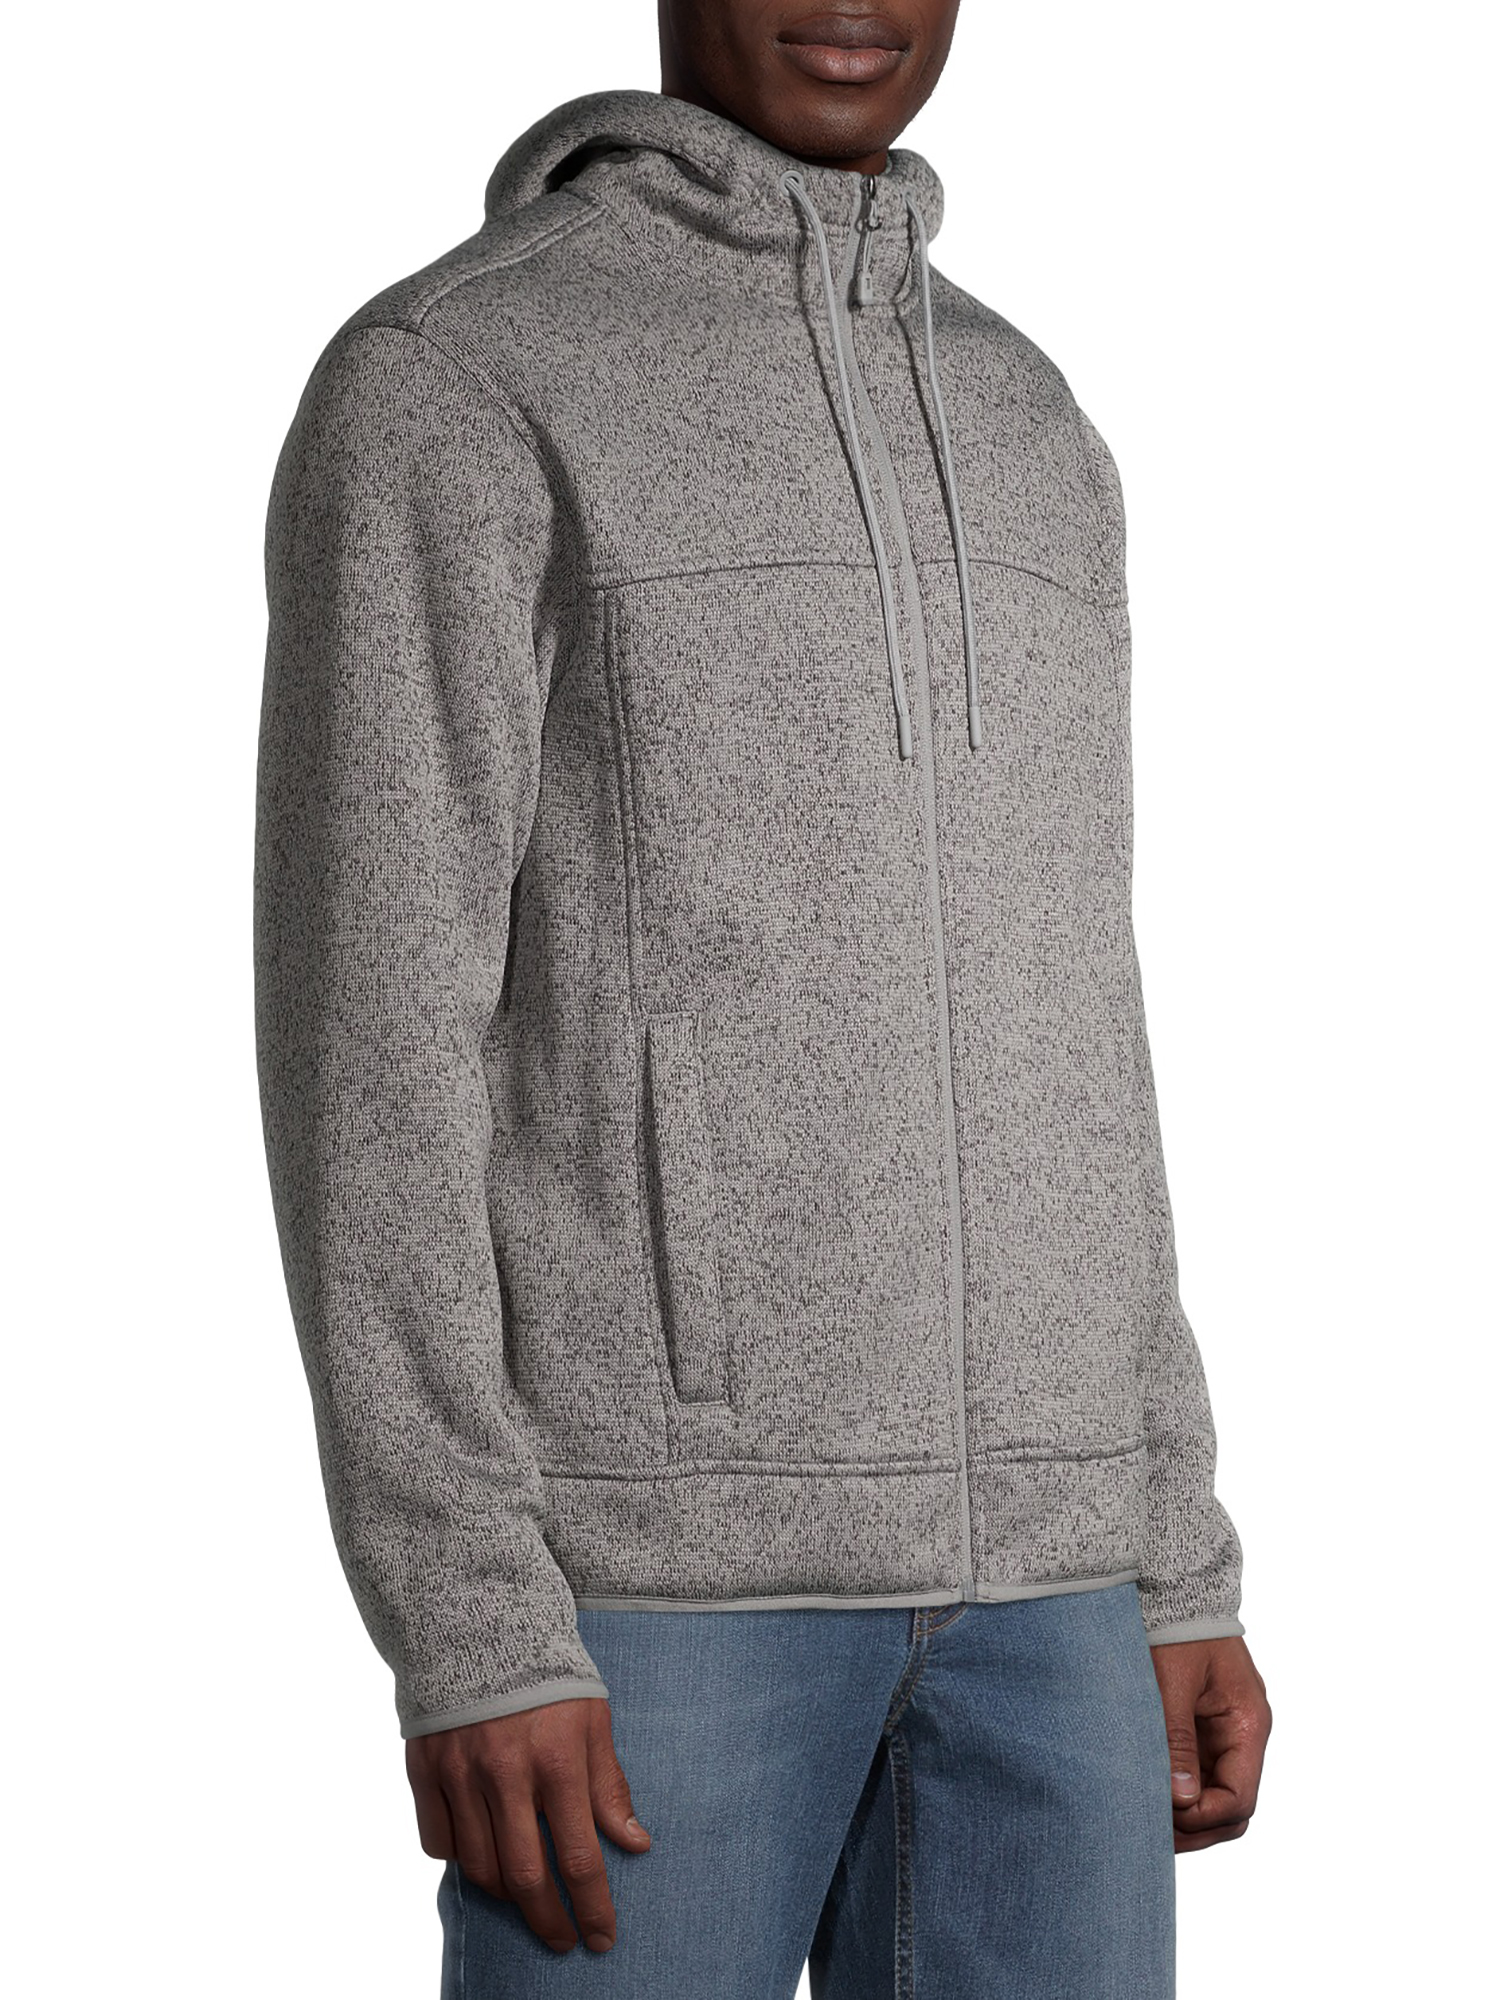 George Men's and Big Men's Sweater Fleece, up to Size 5XL - image 4 of 6